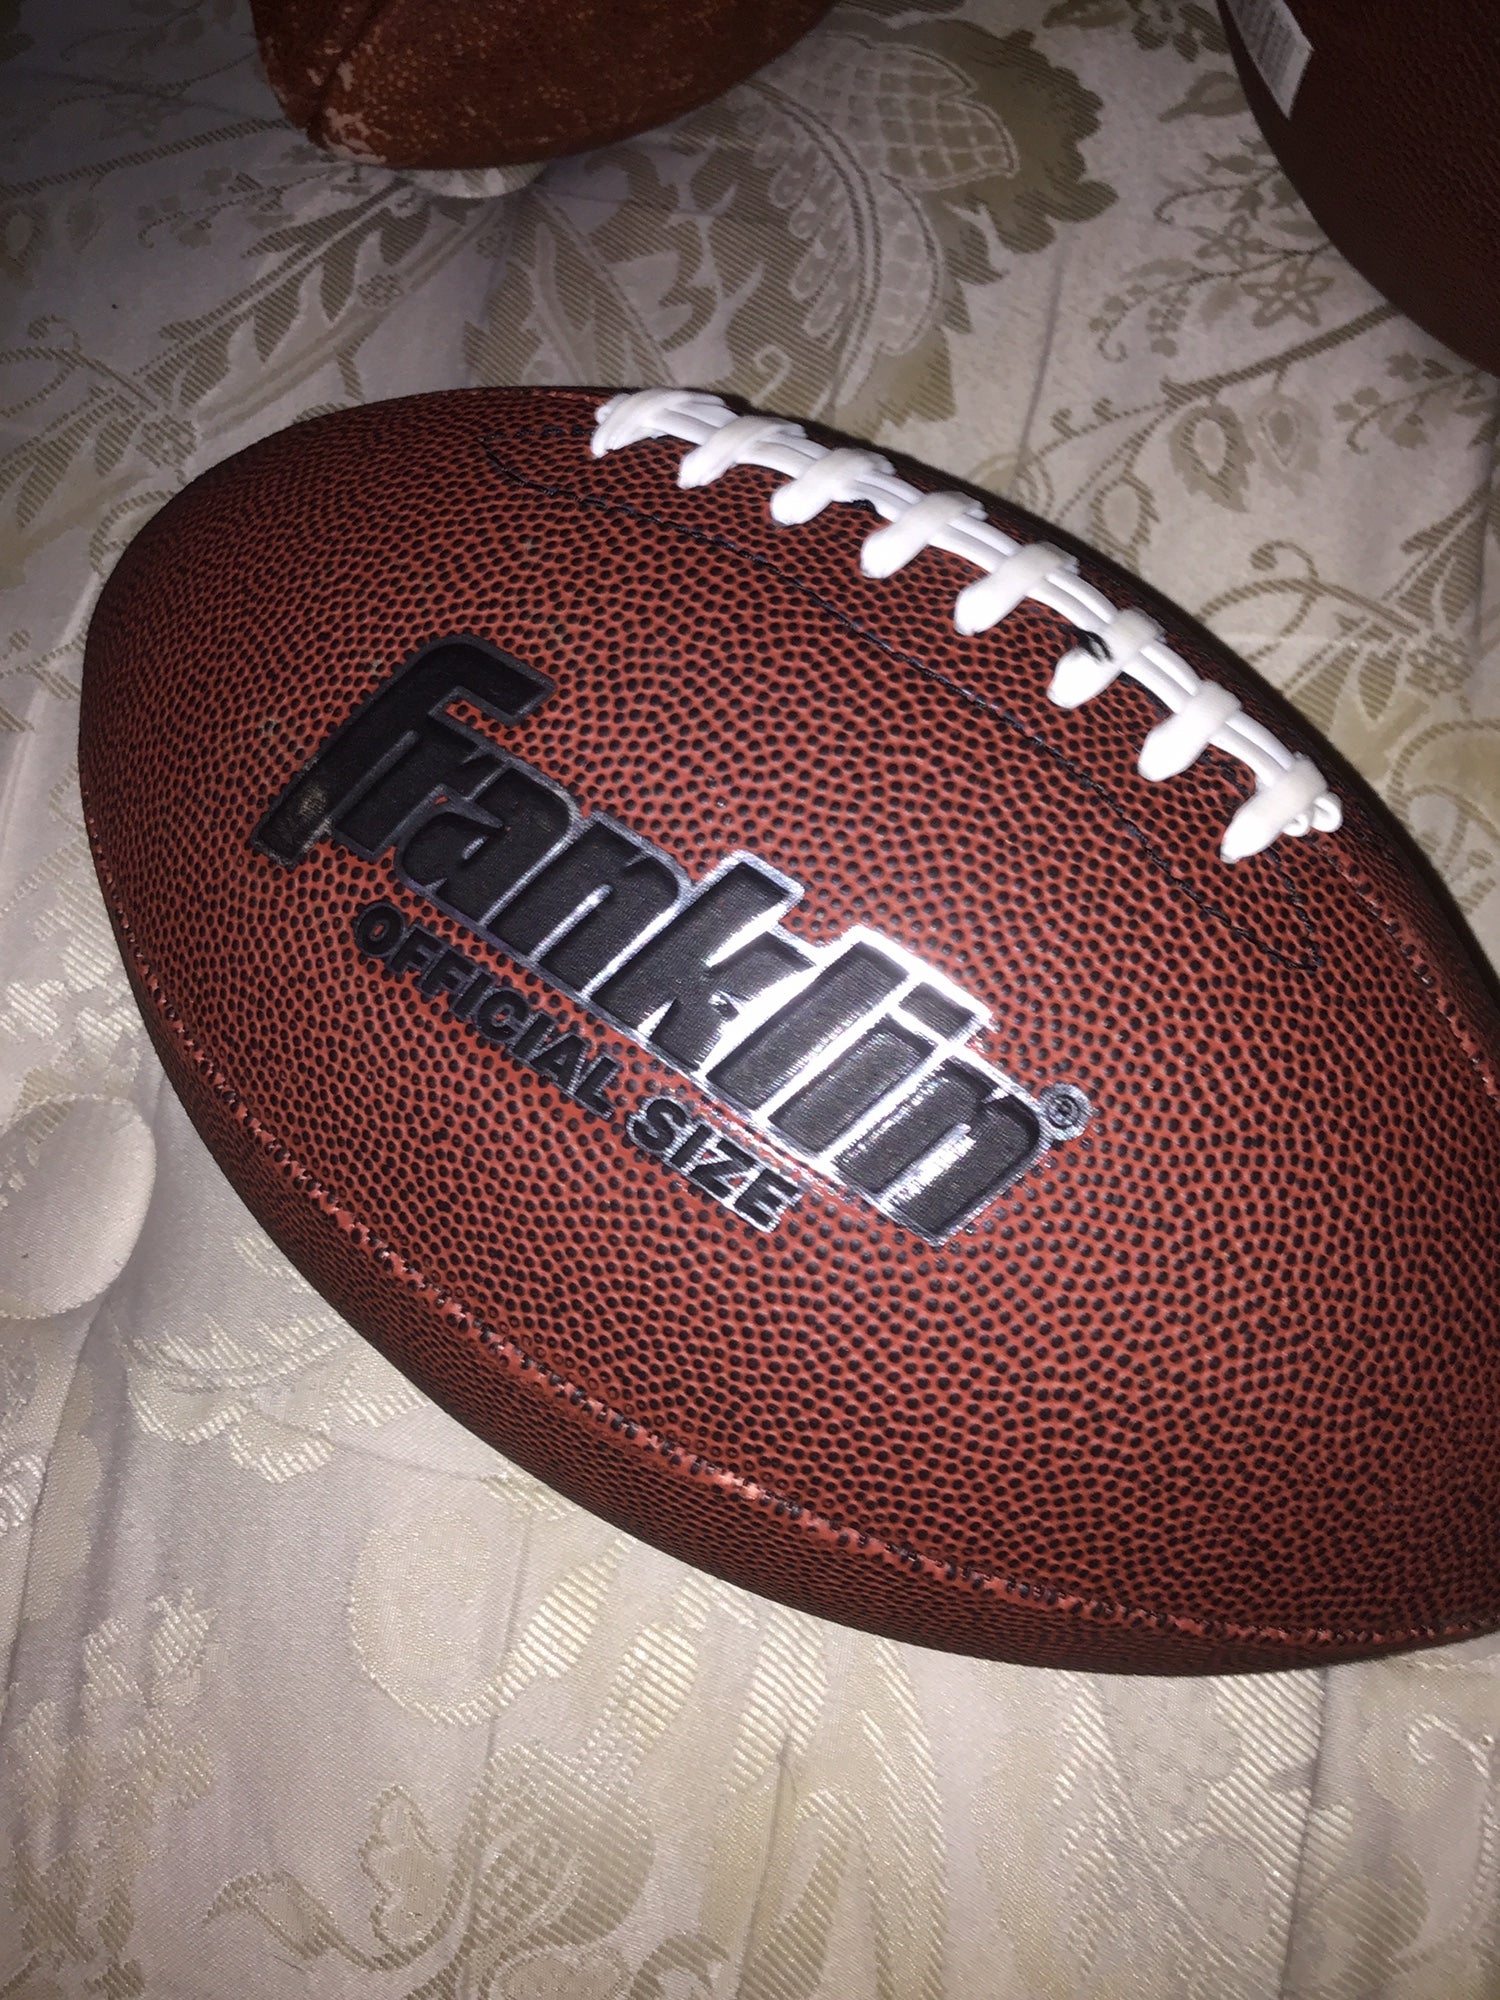 Details about   MacGregor 1st Down Offical Size Football Brown new in box Regent Sports 